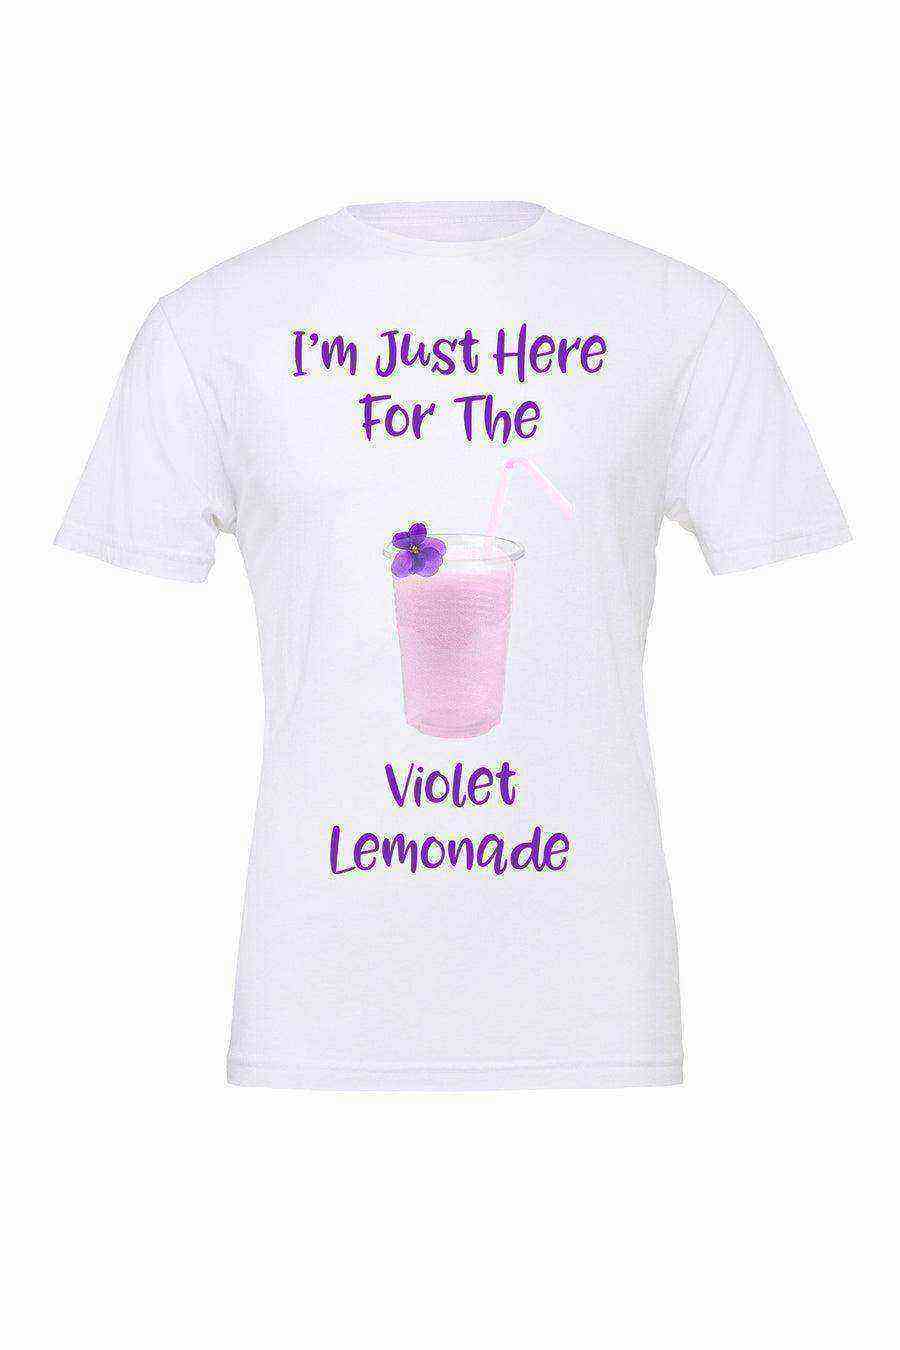 Youth | Im Just Here For The Violet Lemonade Tee - Dylan's Tees